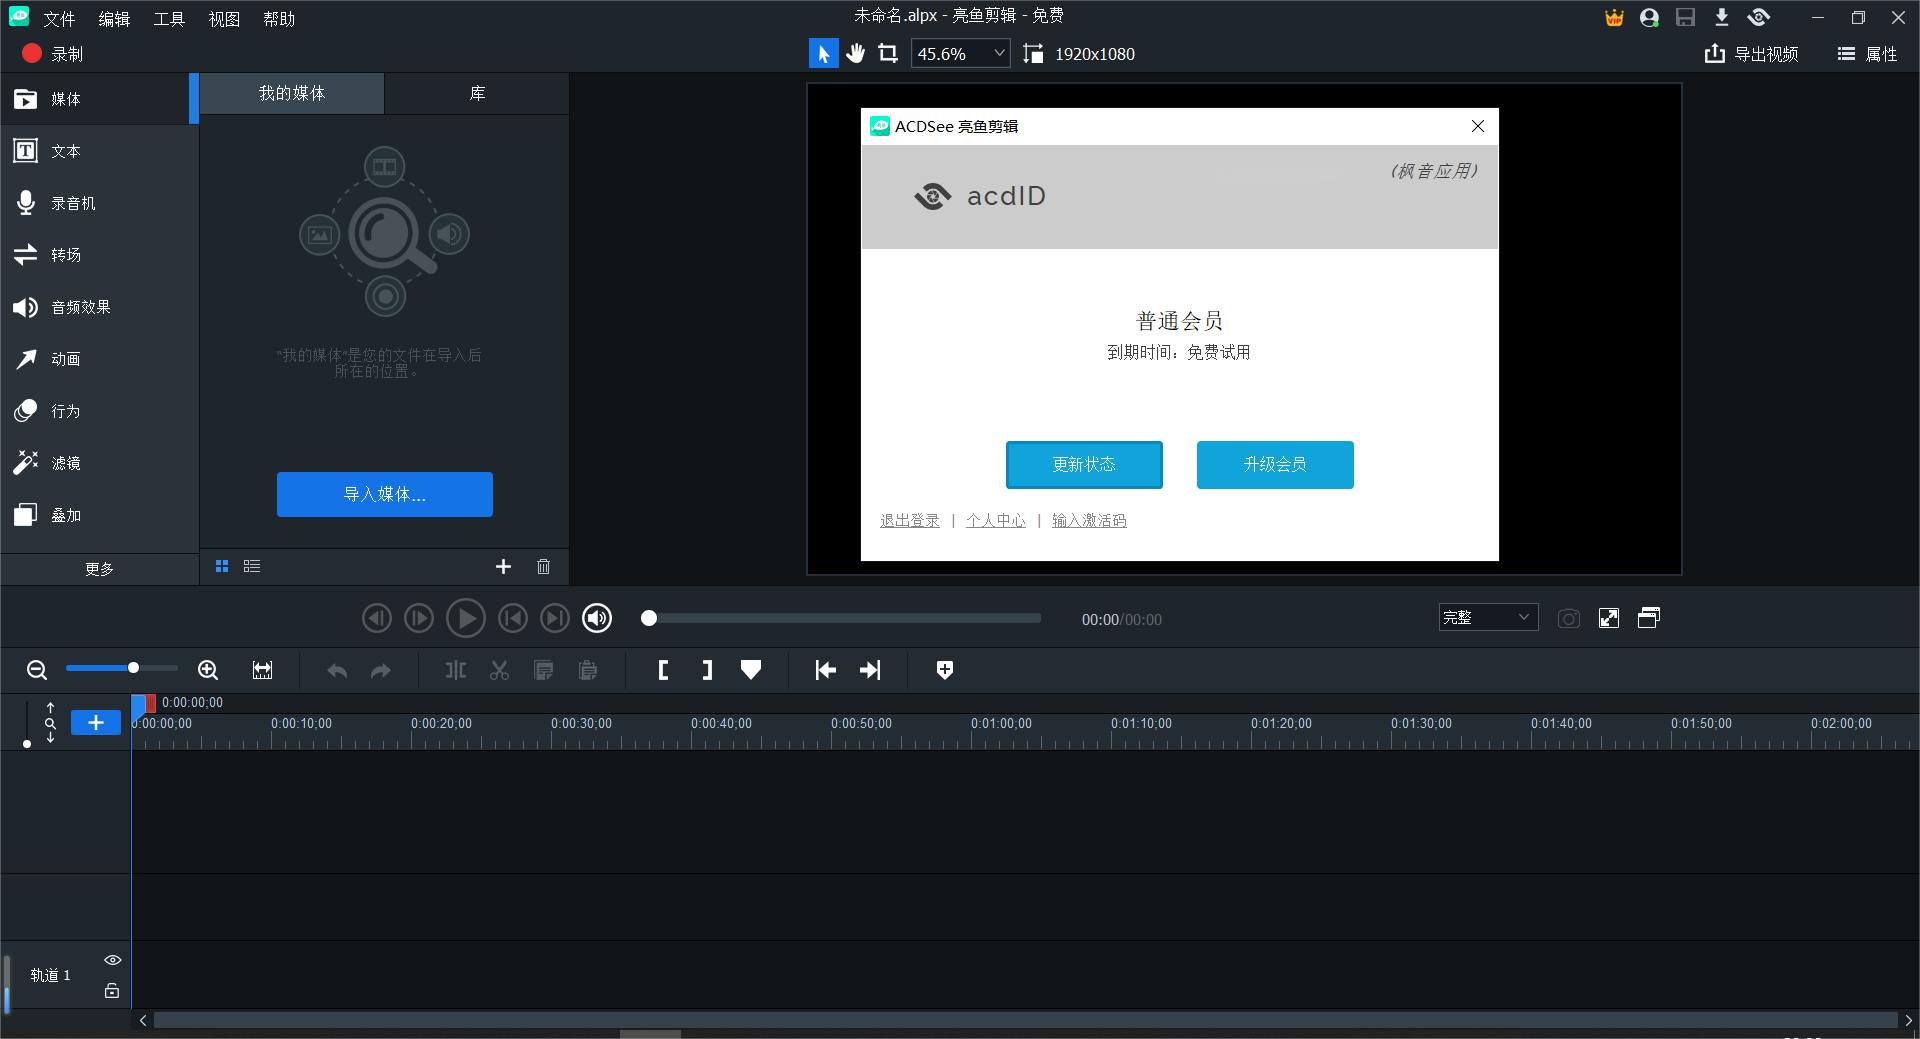 ACDSee Luxea Video Editor 7.1.3.2421 downloading